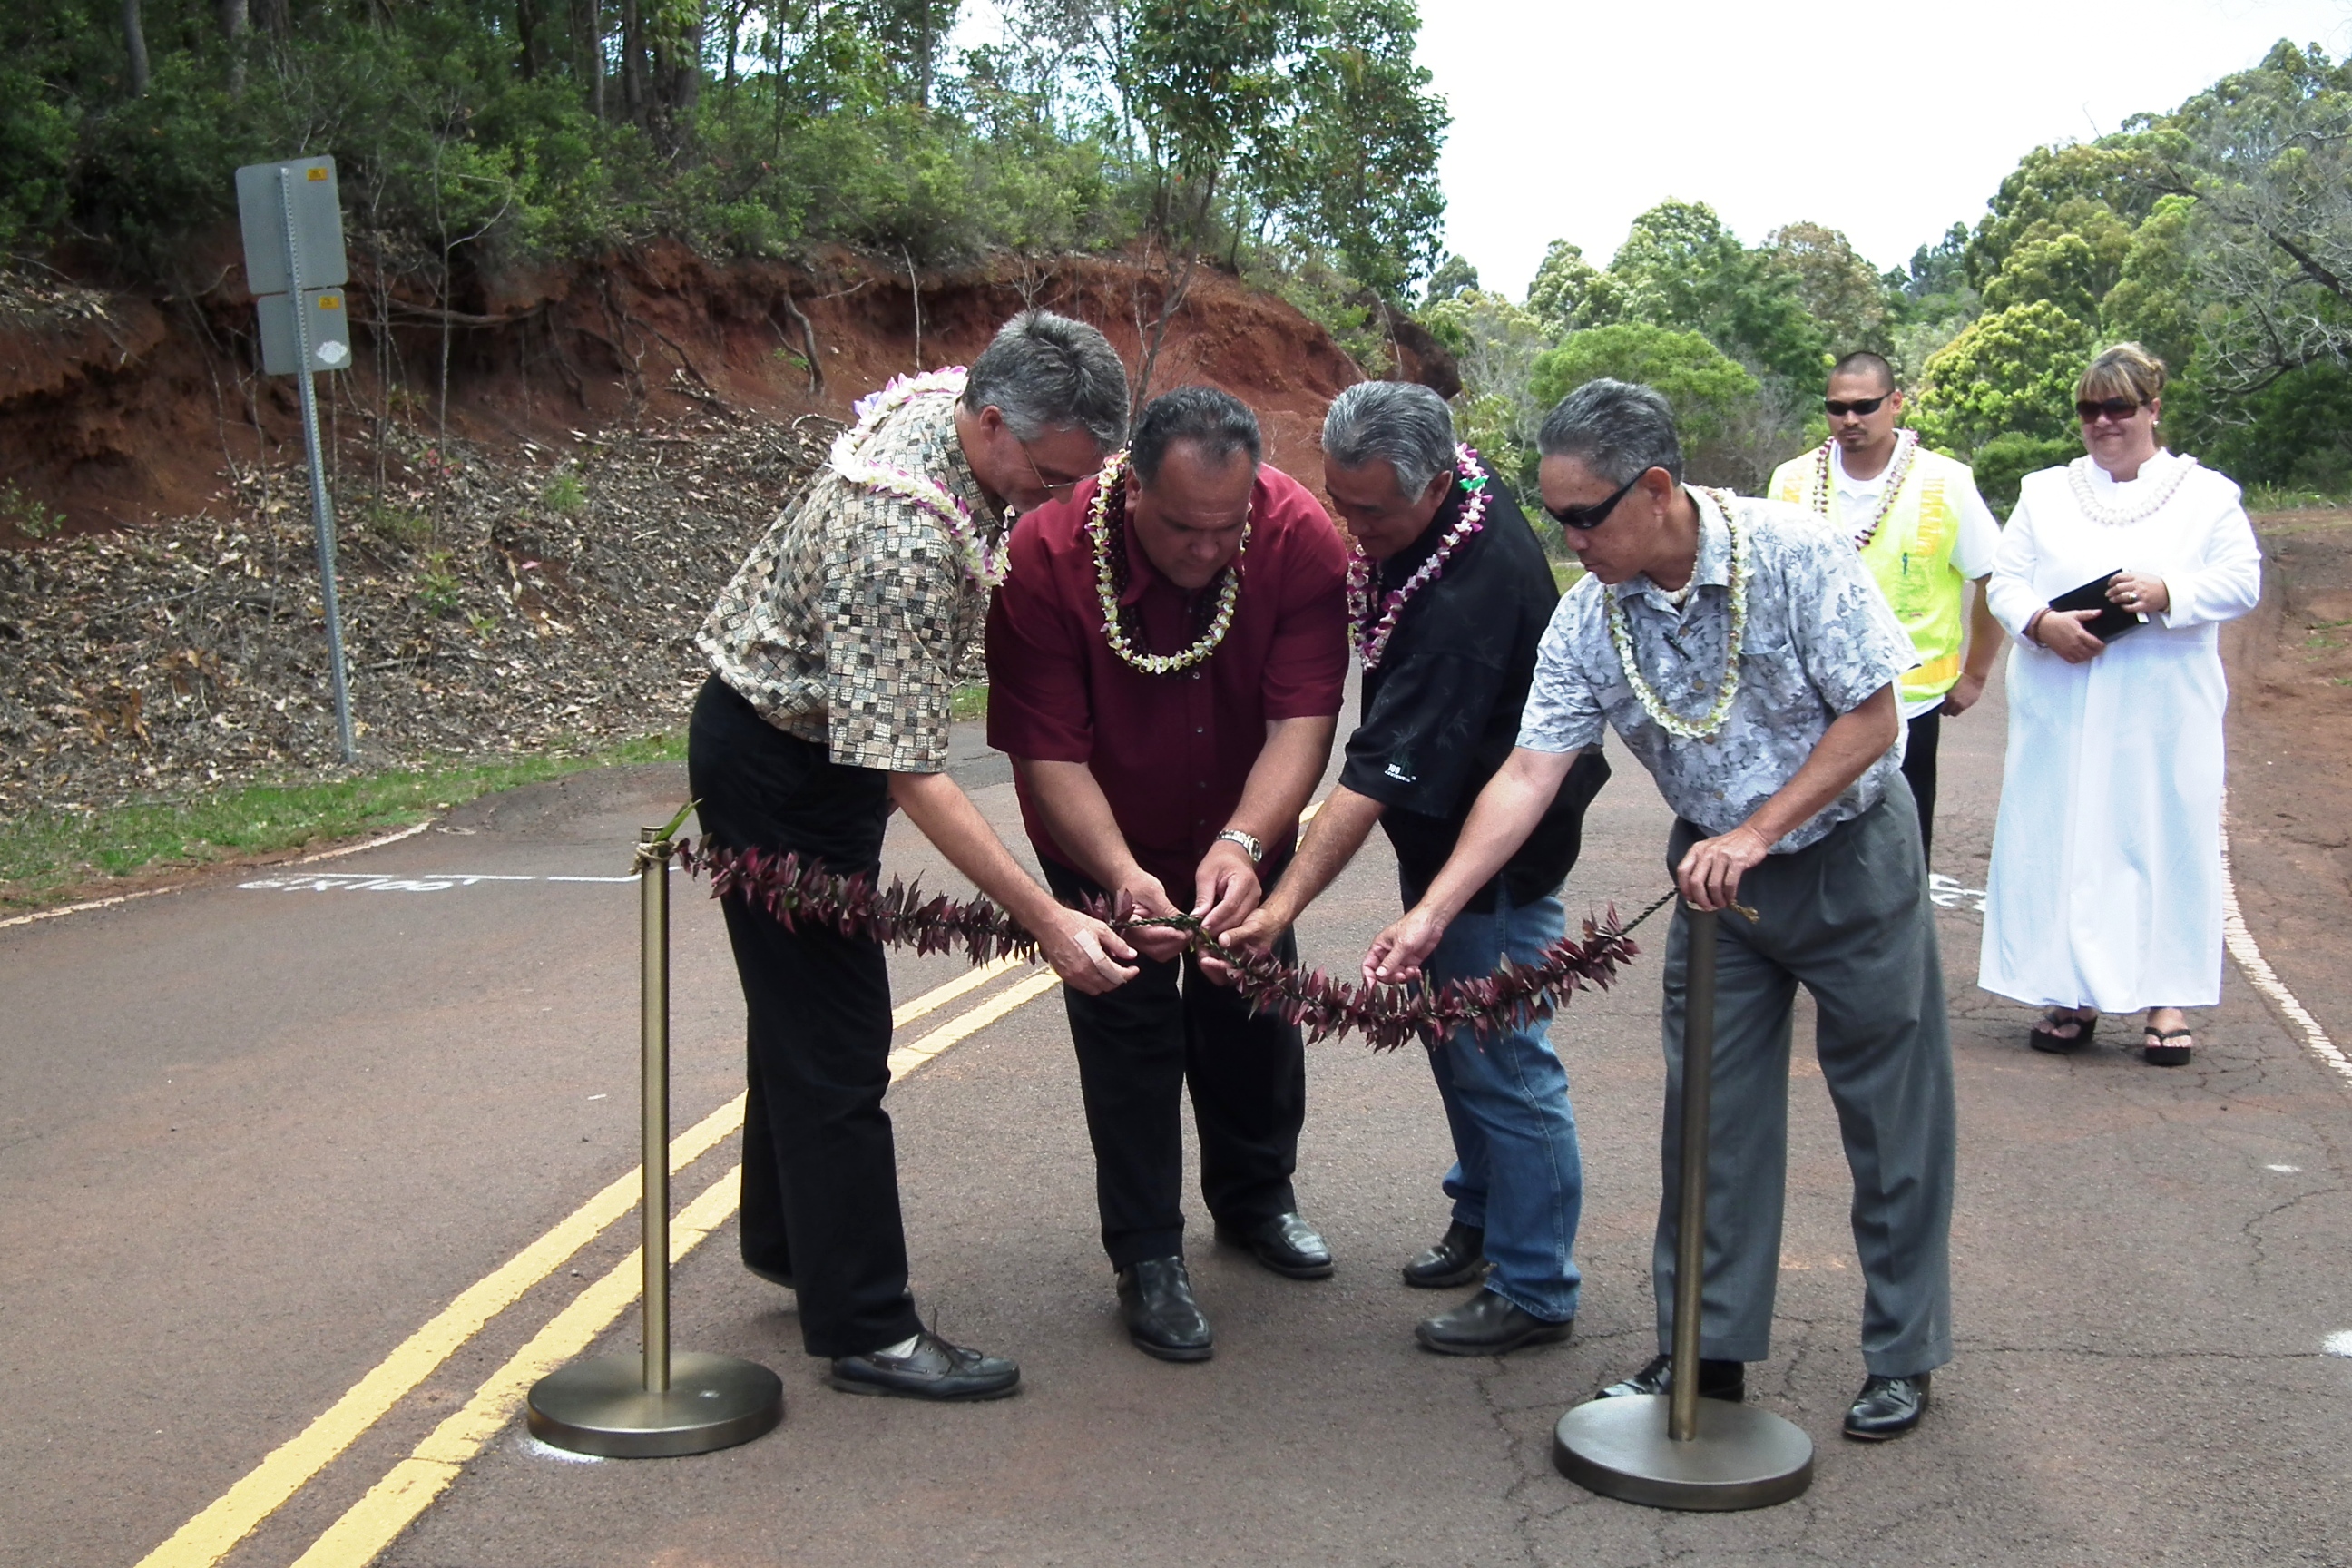 (L To R) County Engineer Larry Dill, Mayor Bernard Carvalho, Jr., Norman Shinno, island manager with Grace Pacific Corp, and County Councilman Dickie Chang untie the traditional lei following a blessing that marked the start of the Kokee Road enhancement project, while project manager Marween Ibanez and Kahu Jade Battad look on.